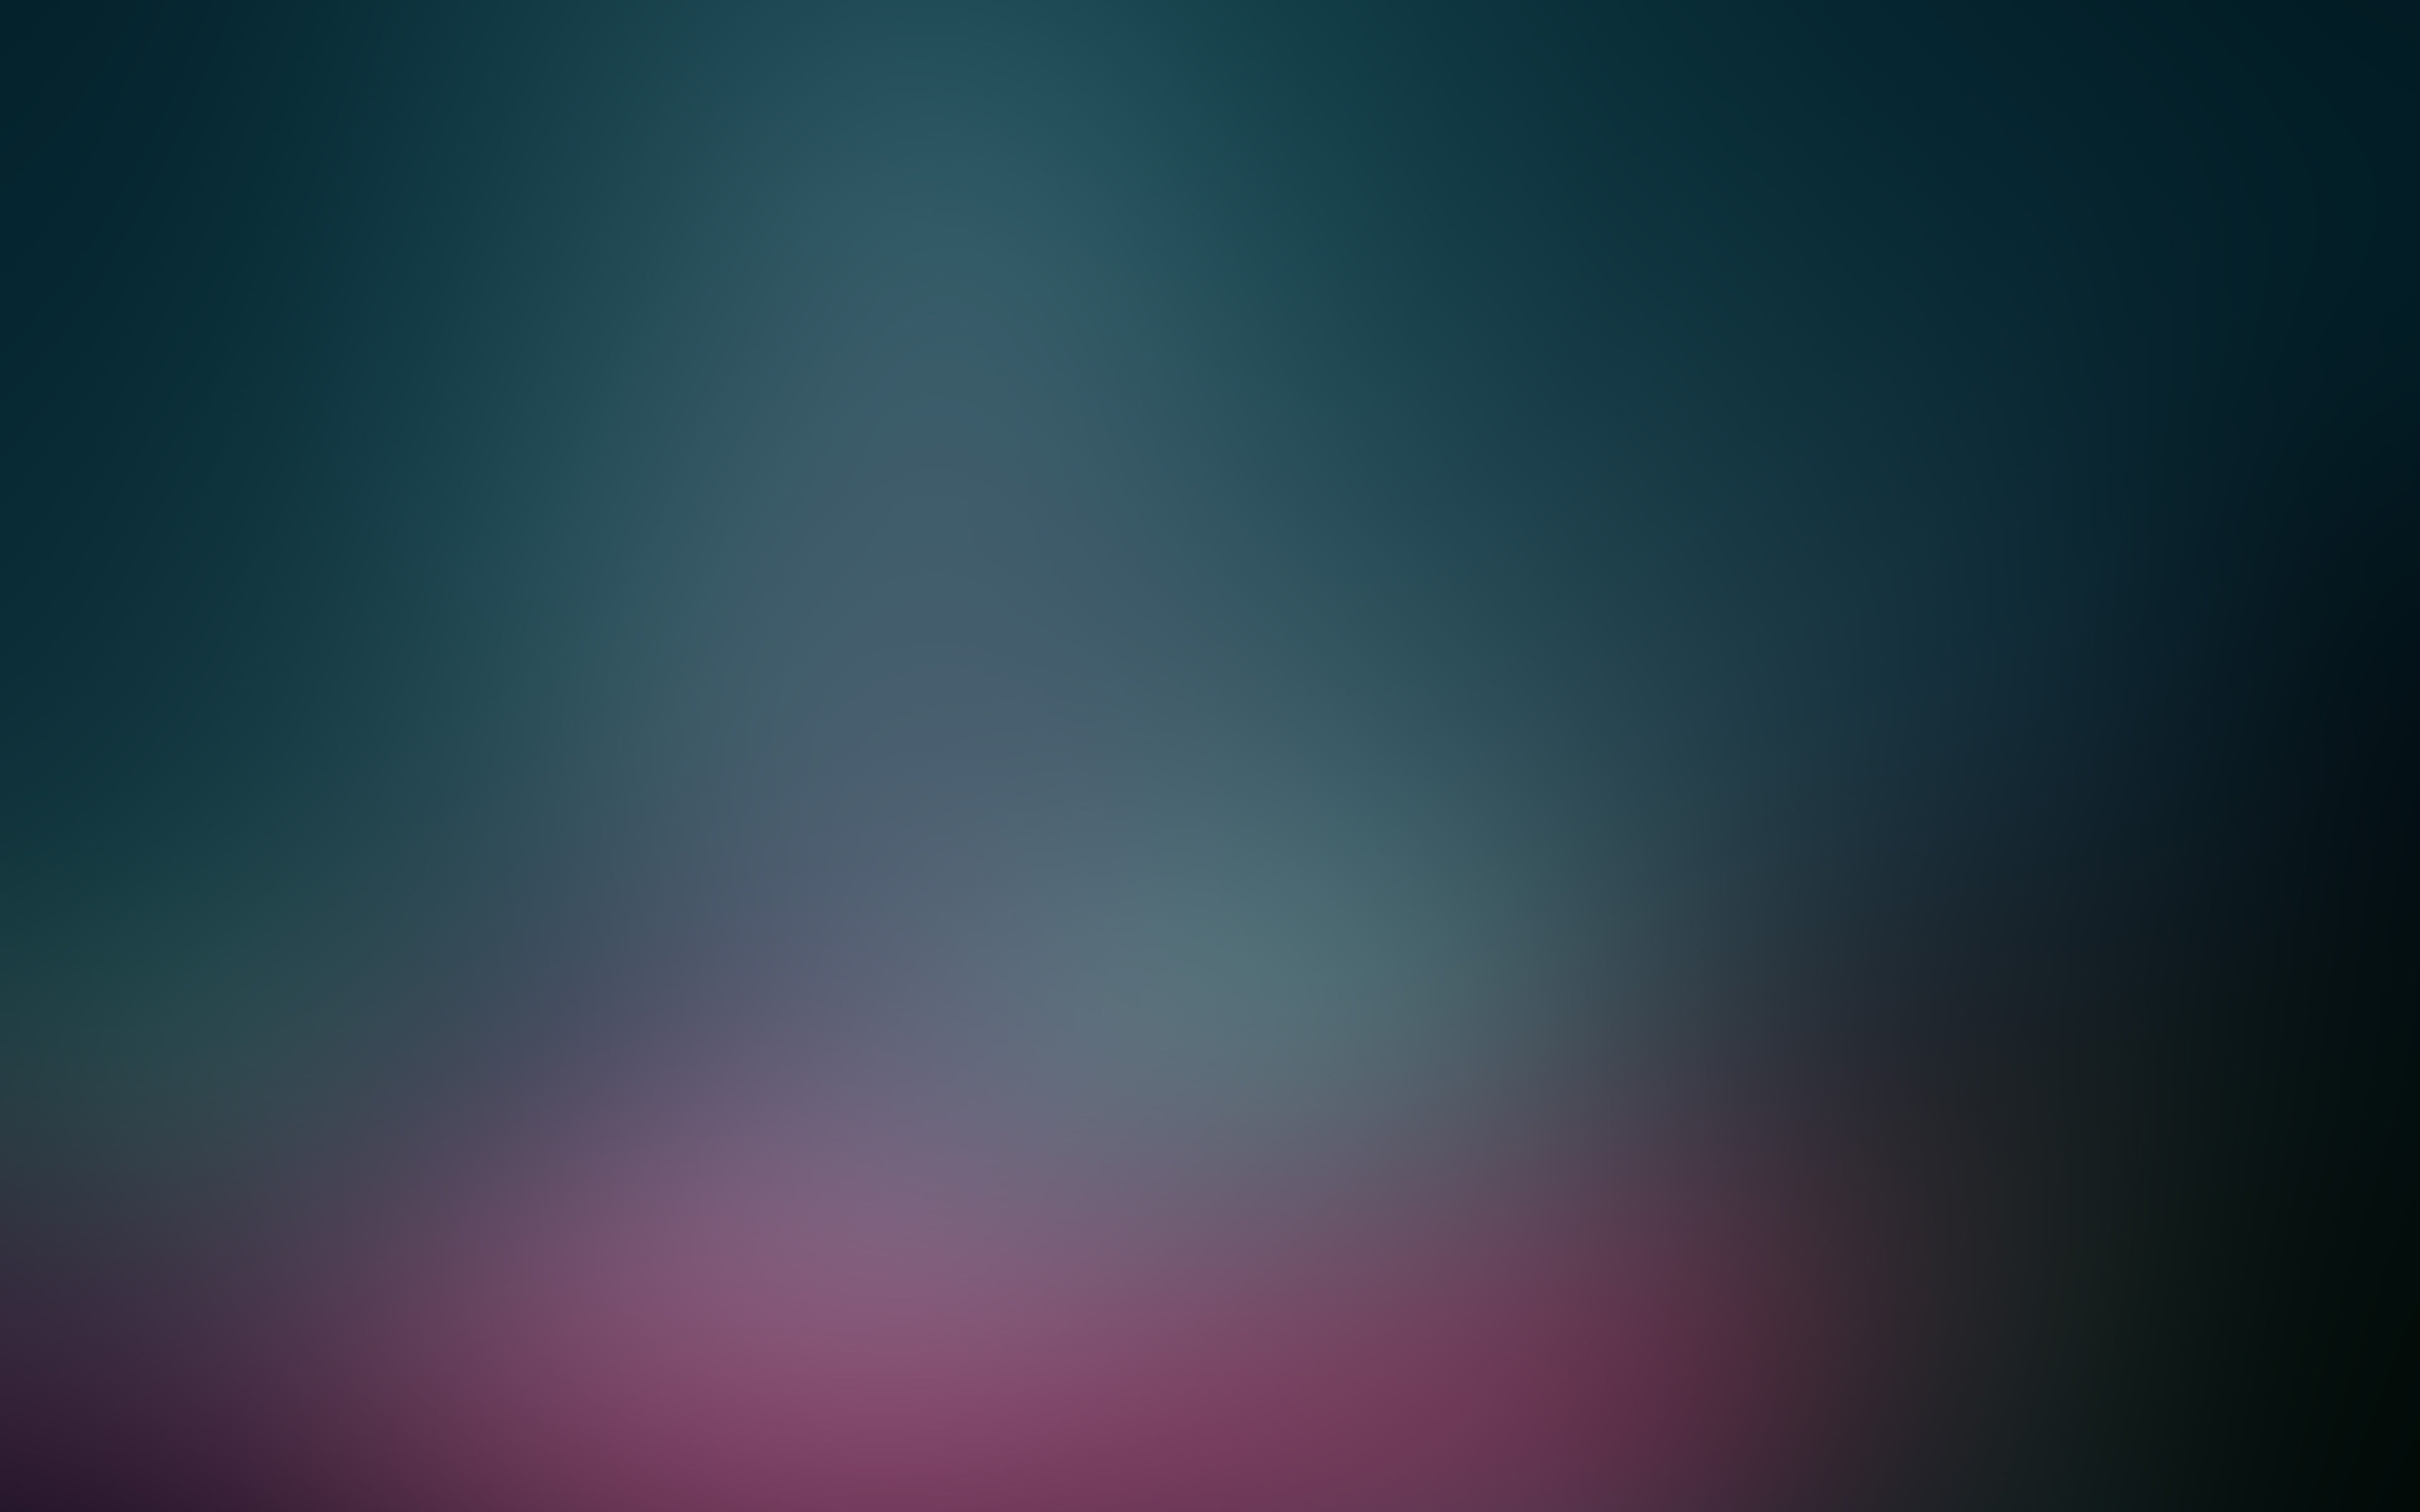 sf, night, iam, blur, gradation, backgrounds, abstract, blue